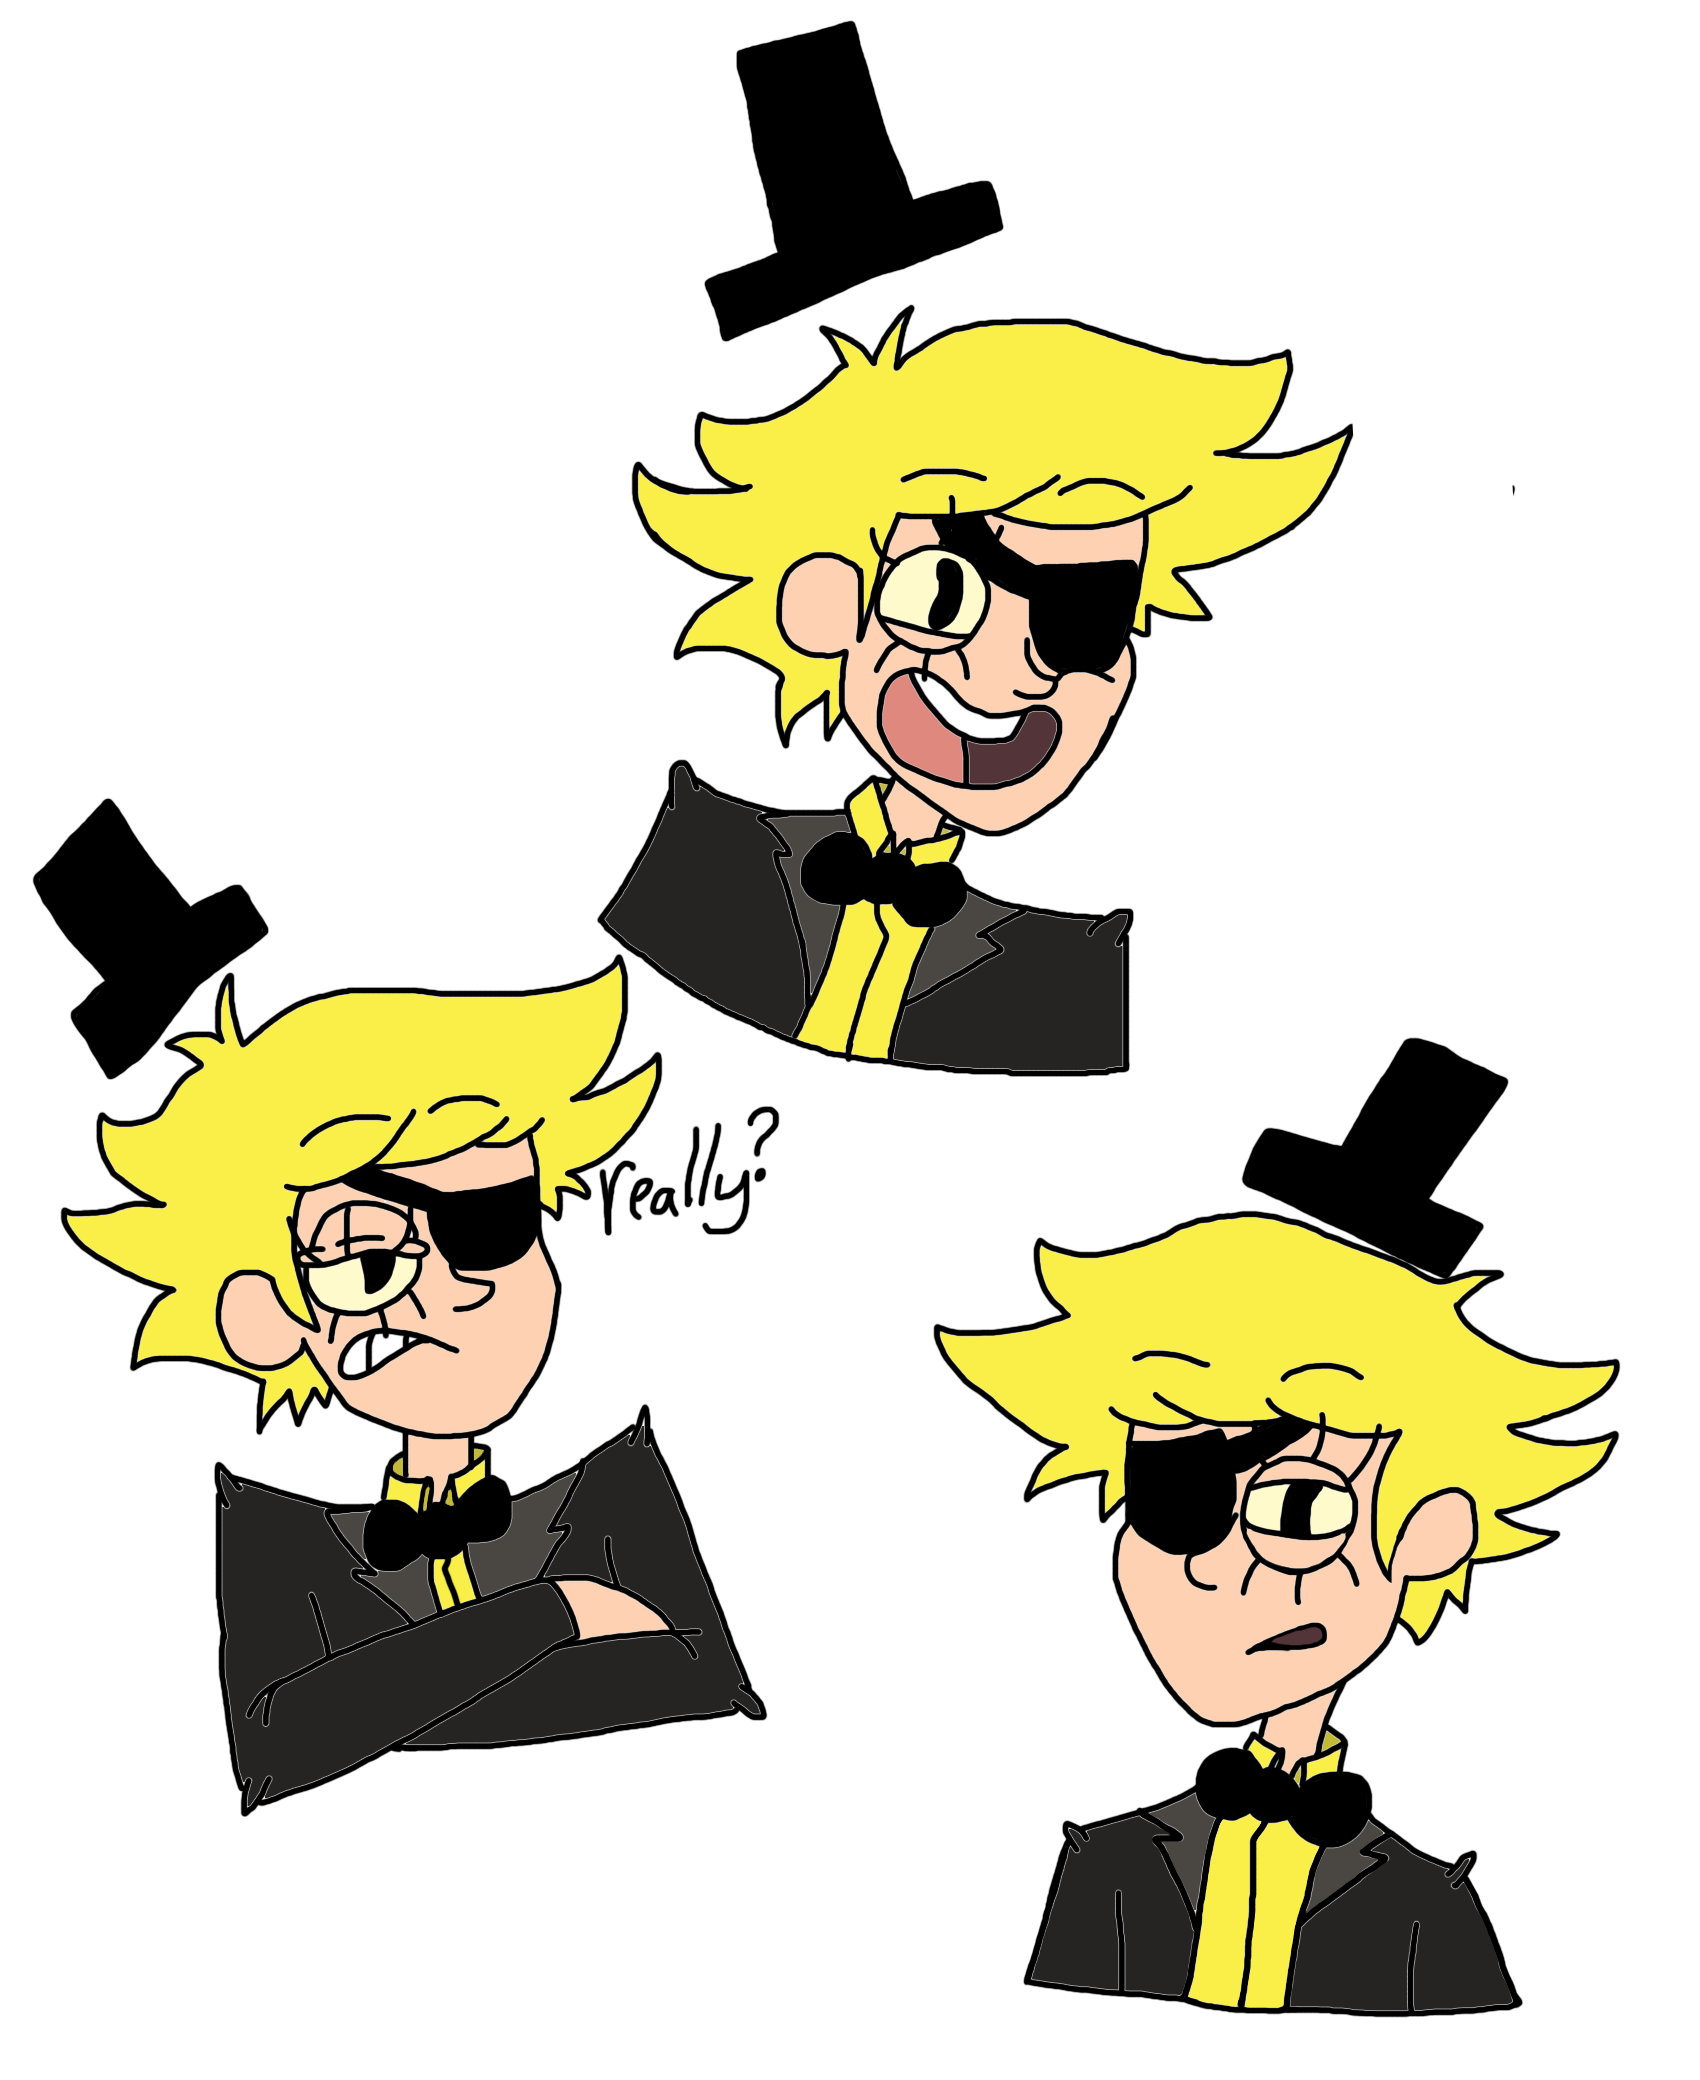 Human Bill cipher doodles by ryiahthefox52 on